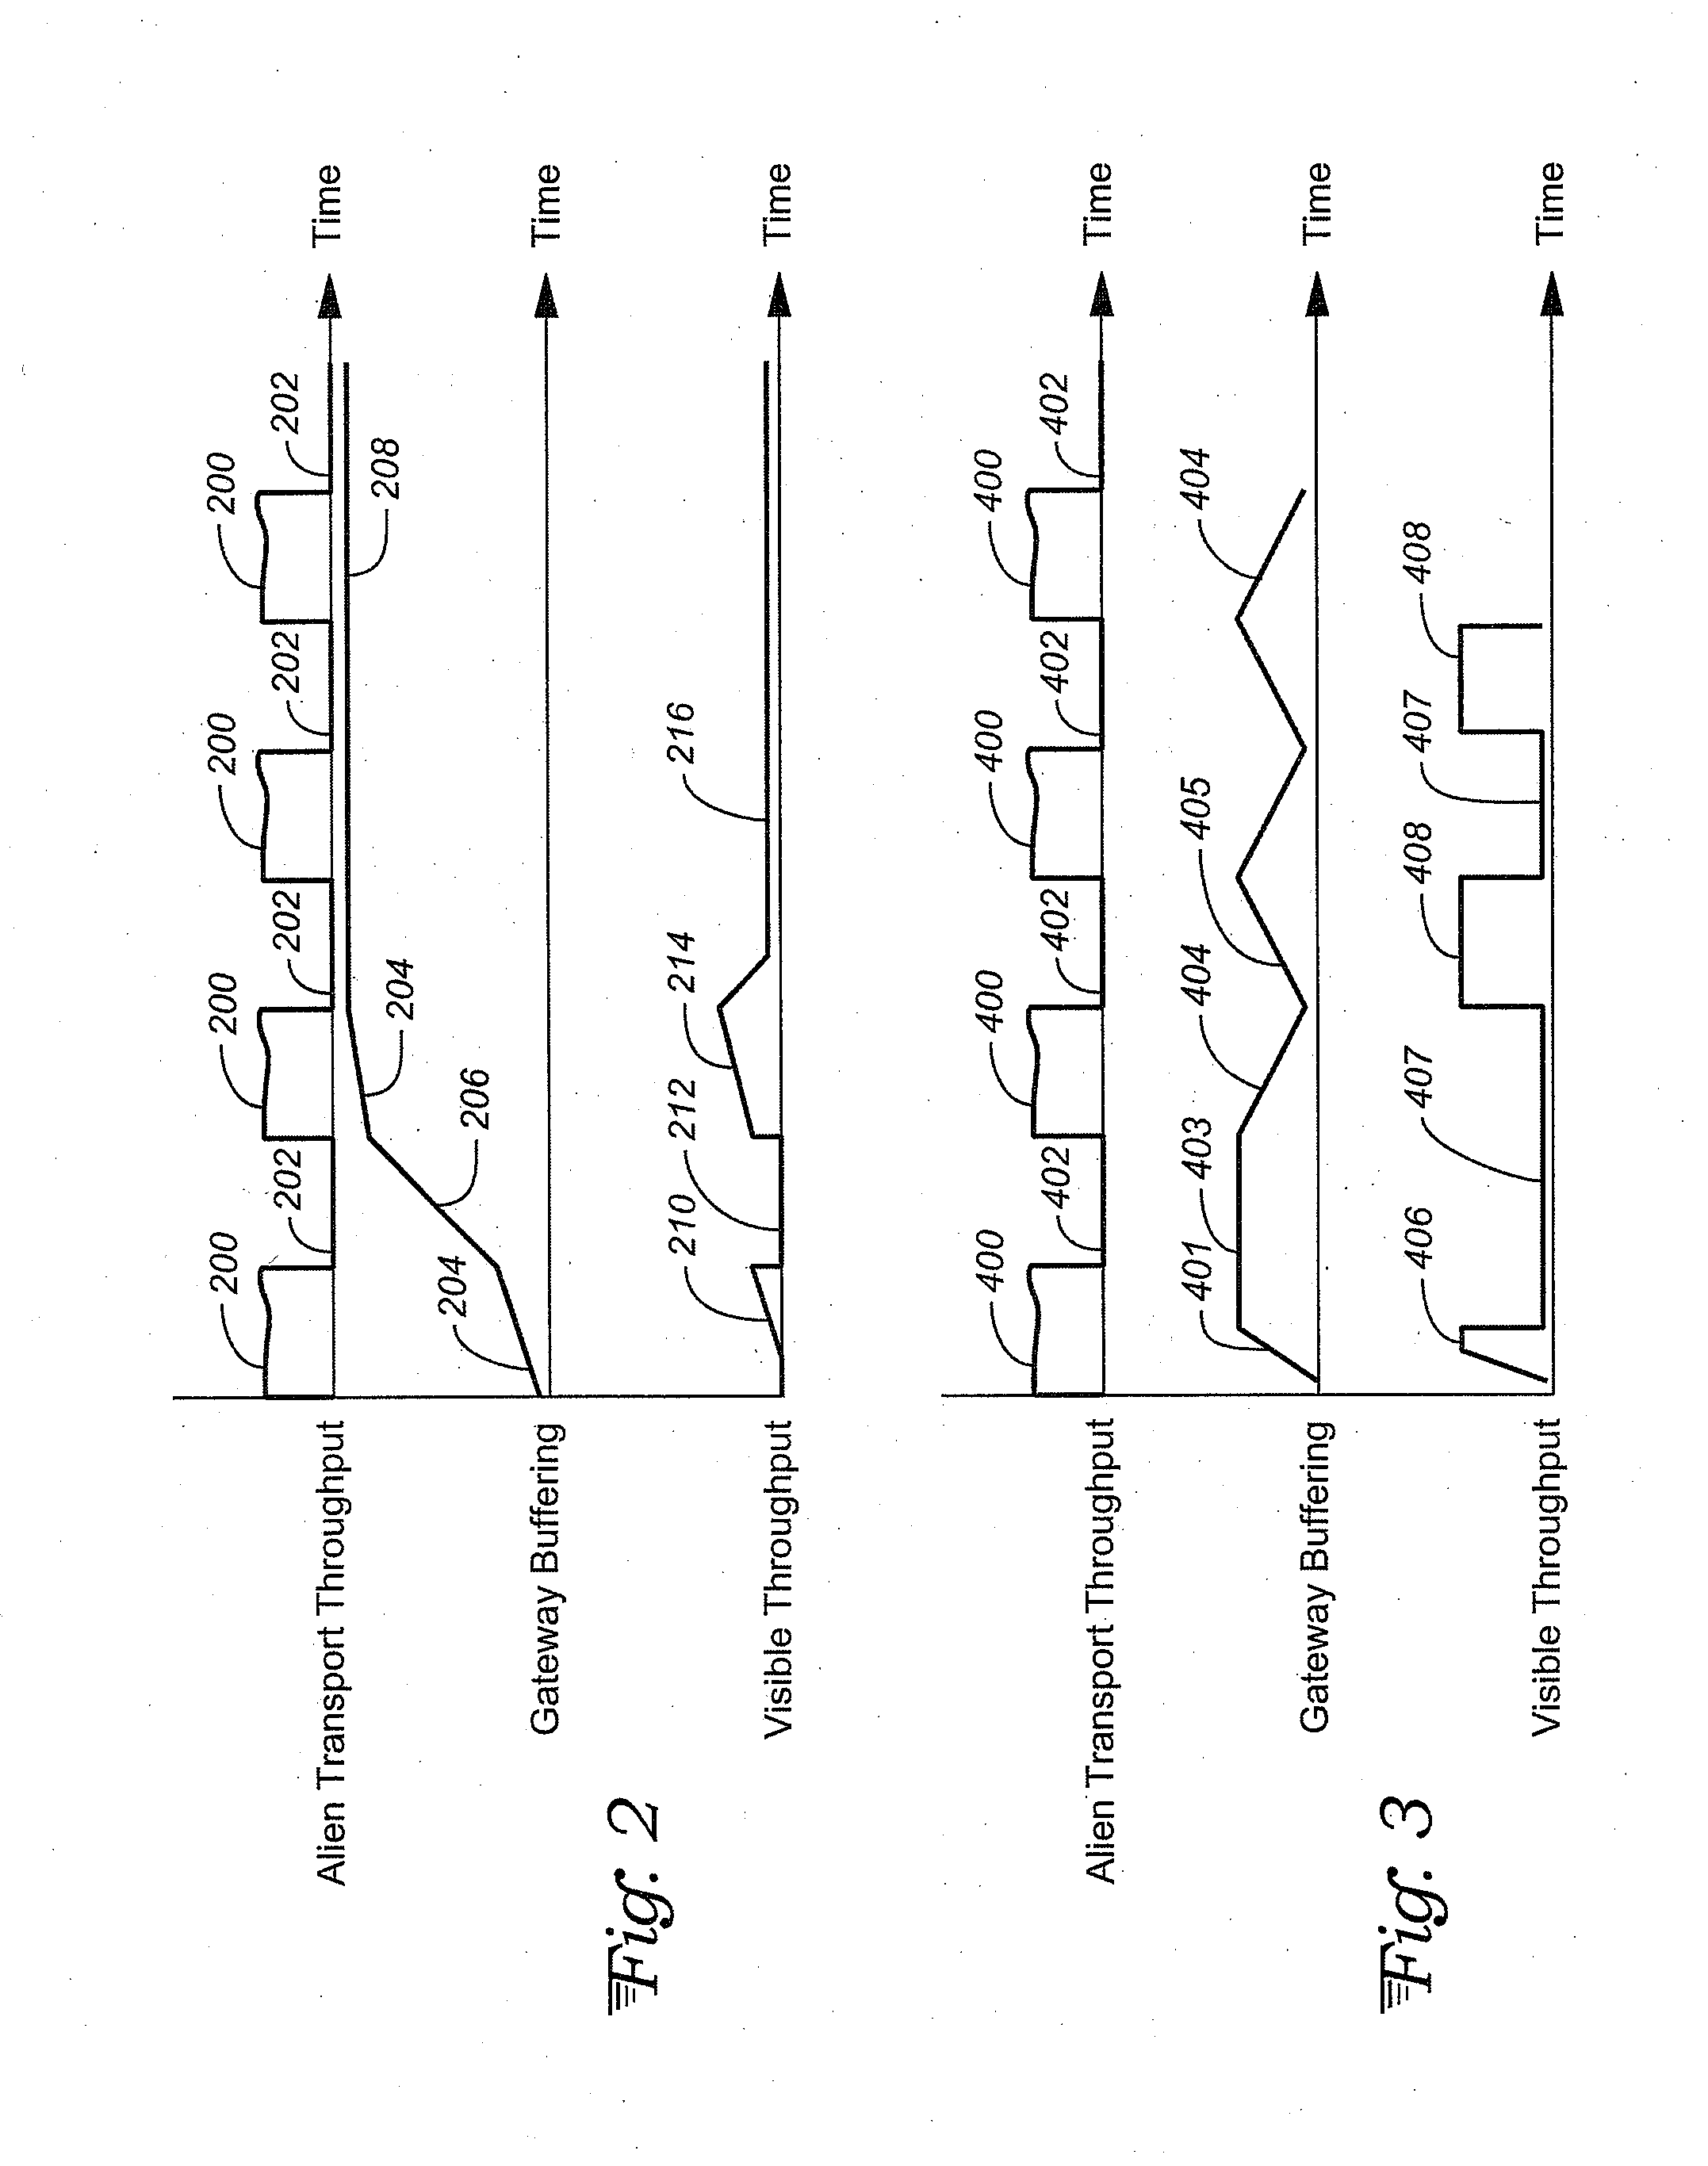 Data transmission system for networks with non-full-duplex or asymmetric transport